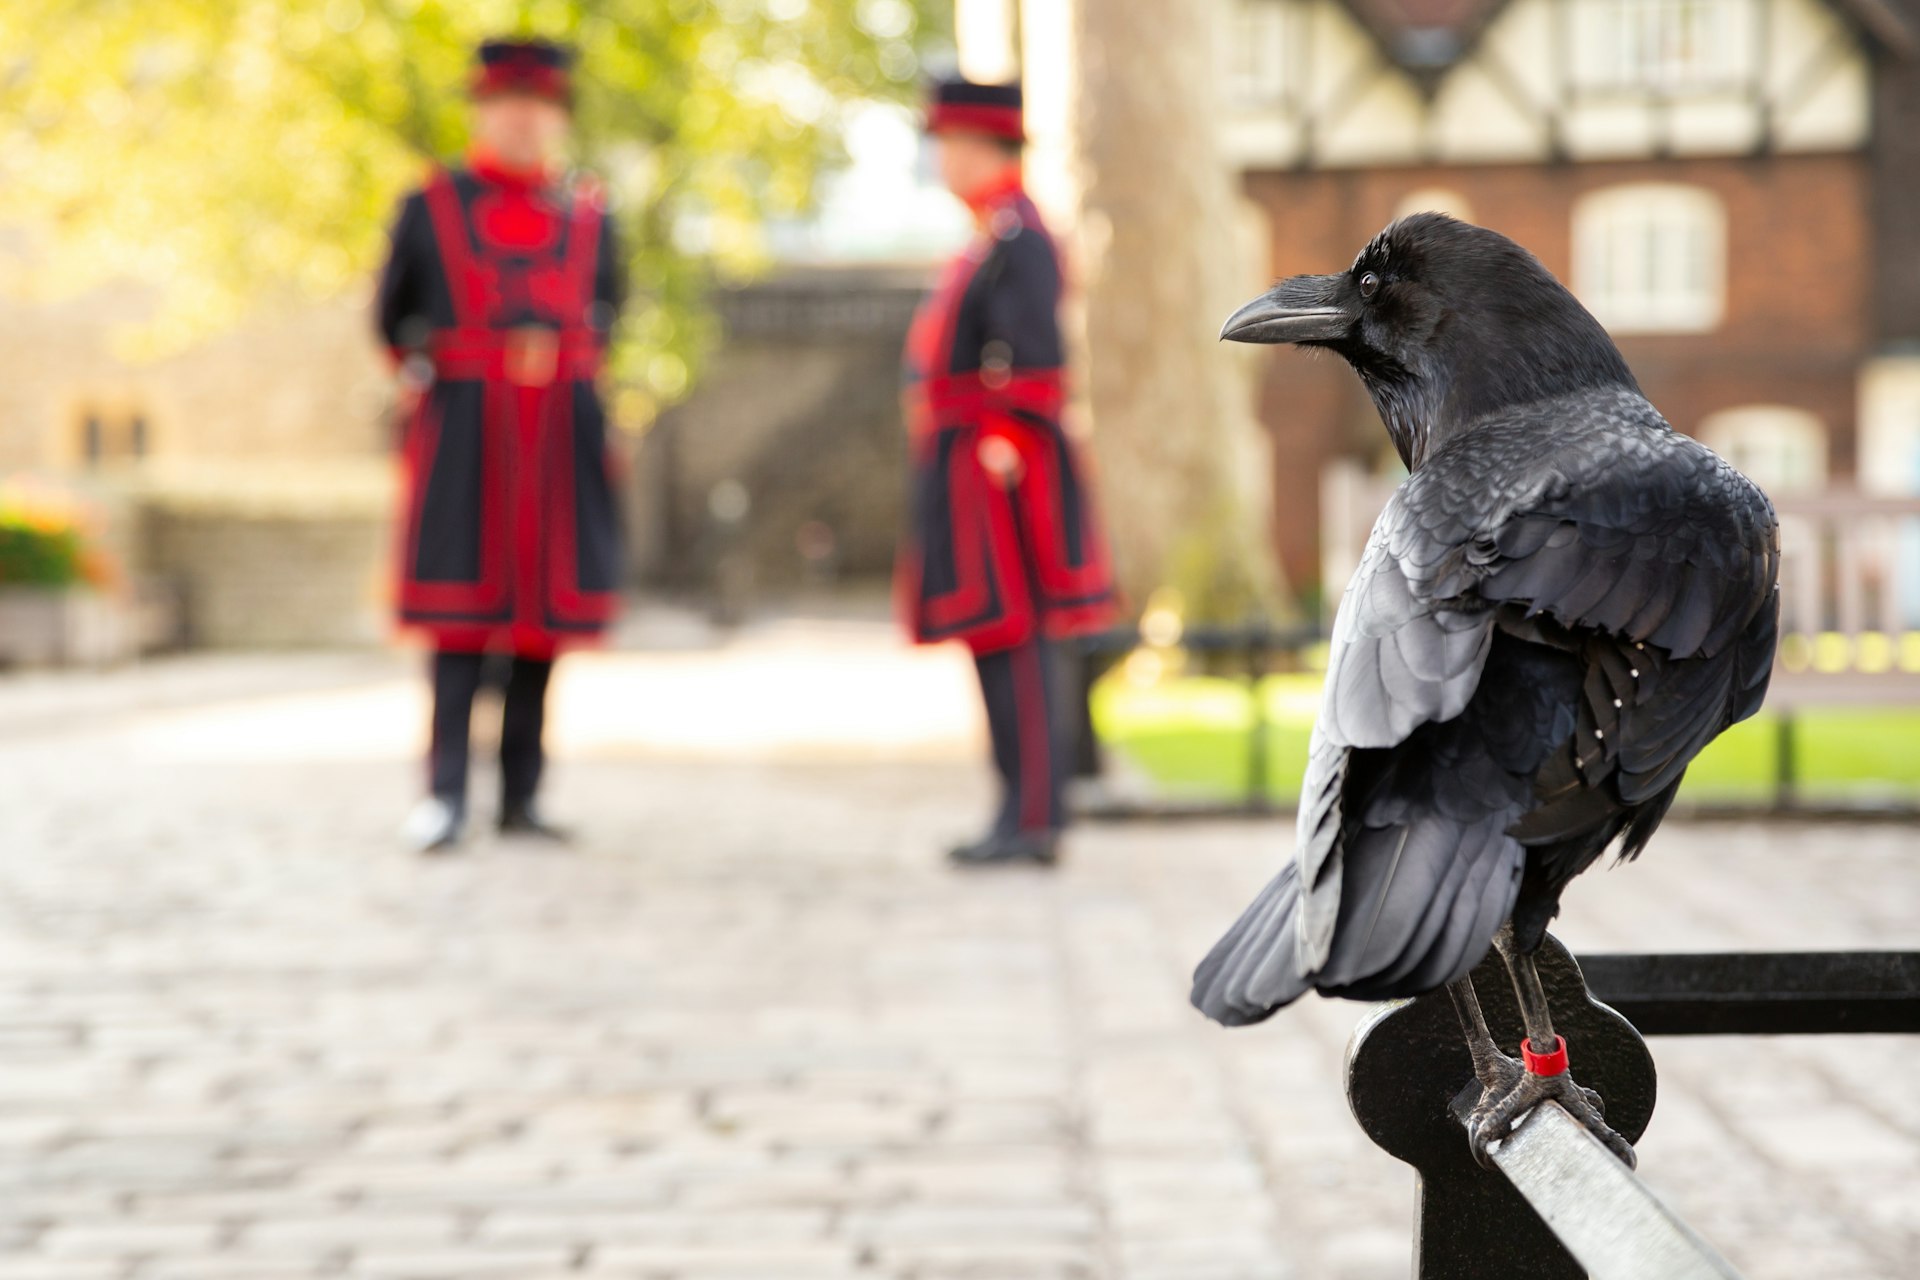 Raven perched on a railing at the Tower of London, with two Yeomen Warders in the background